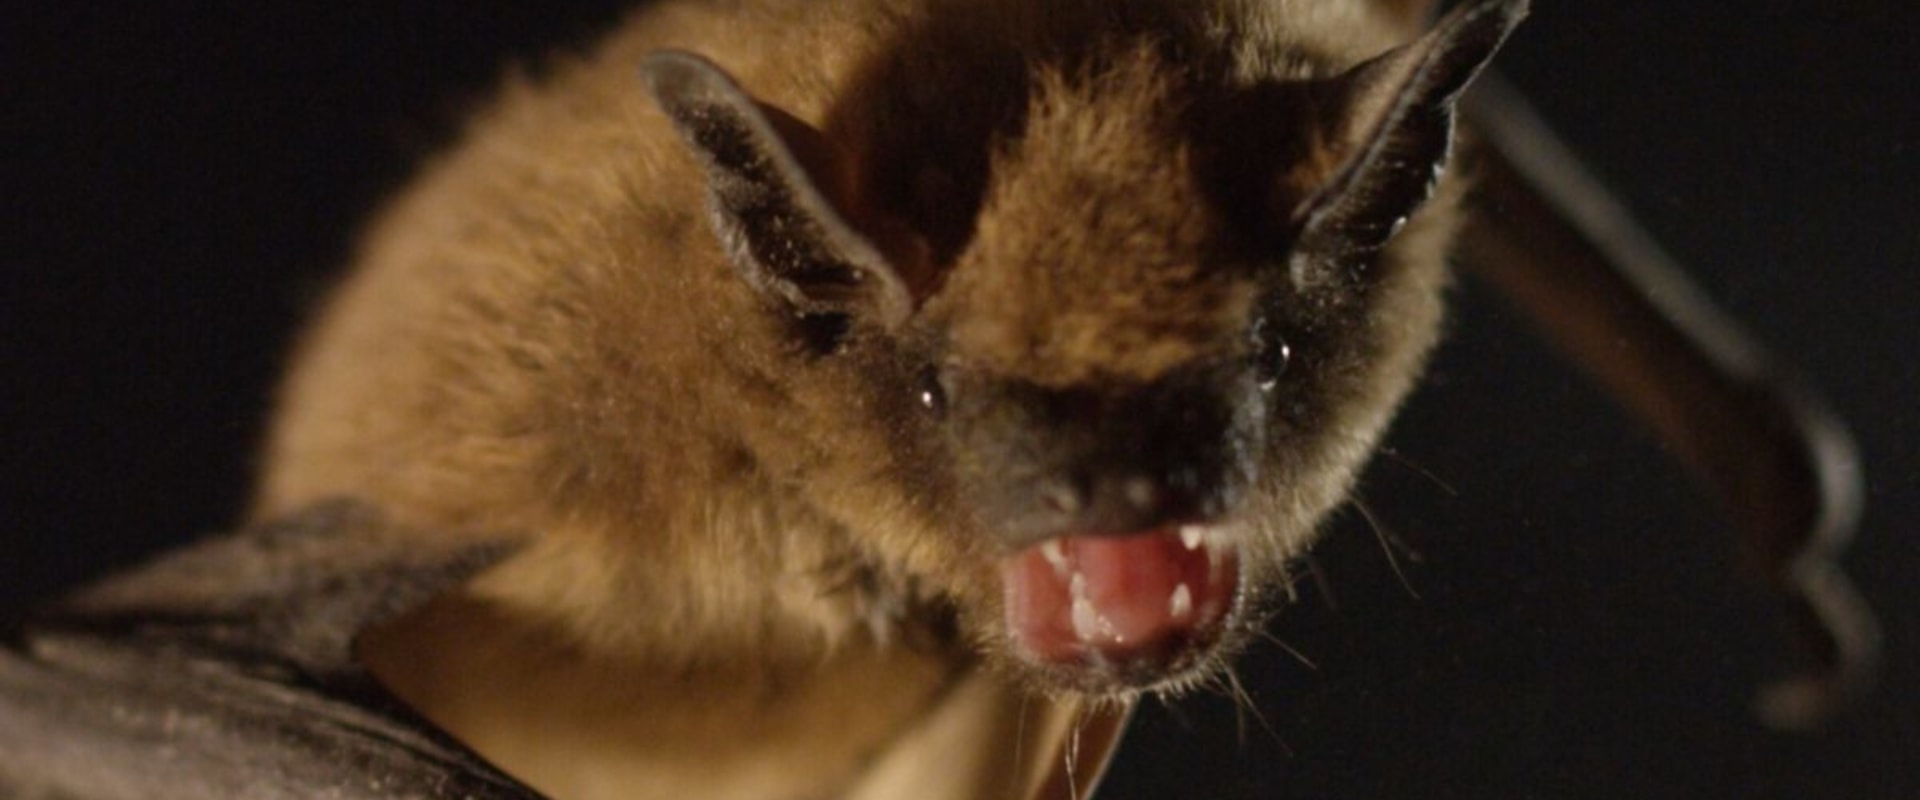 Can you get sick from having bats in your attic?